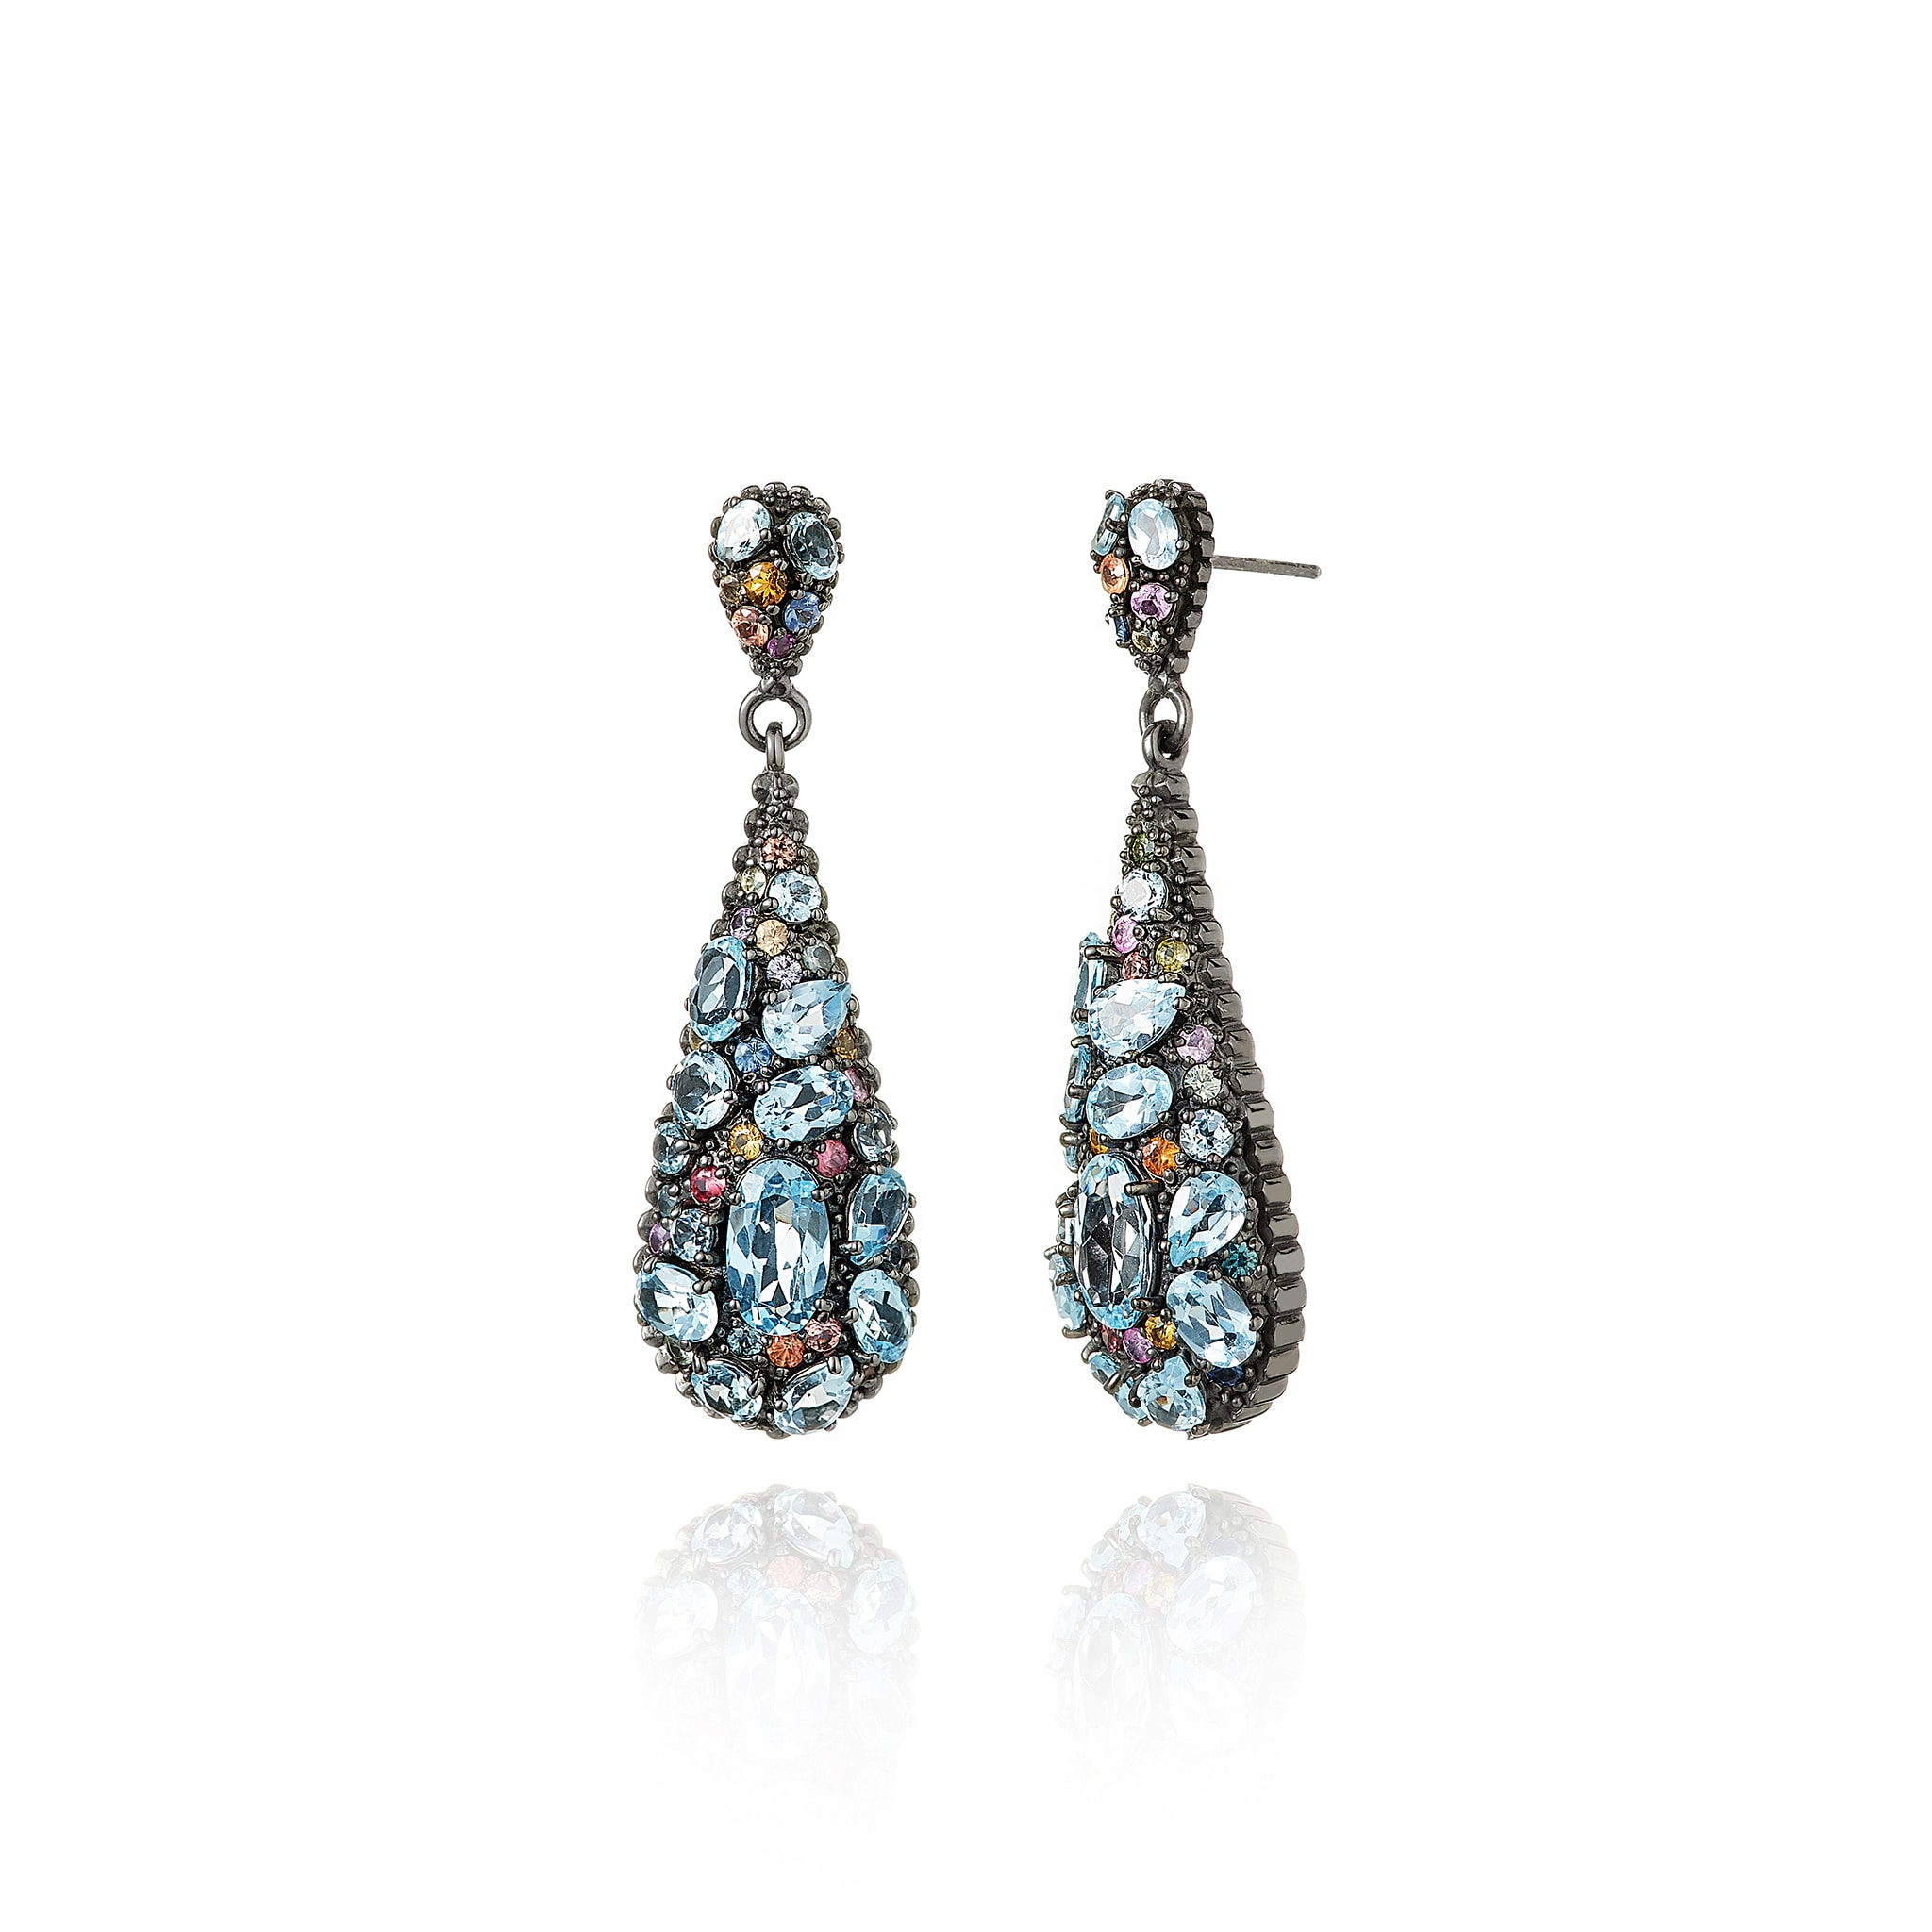 MCL Design Black Rhodium Plated Sterling Silver Statement Drop Earrings with Mixed Sapphires & Blue Topaz